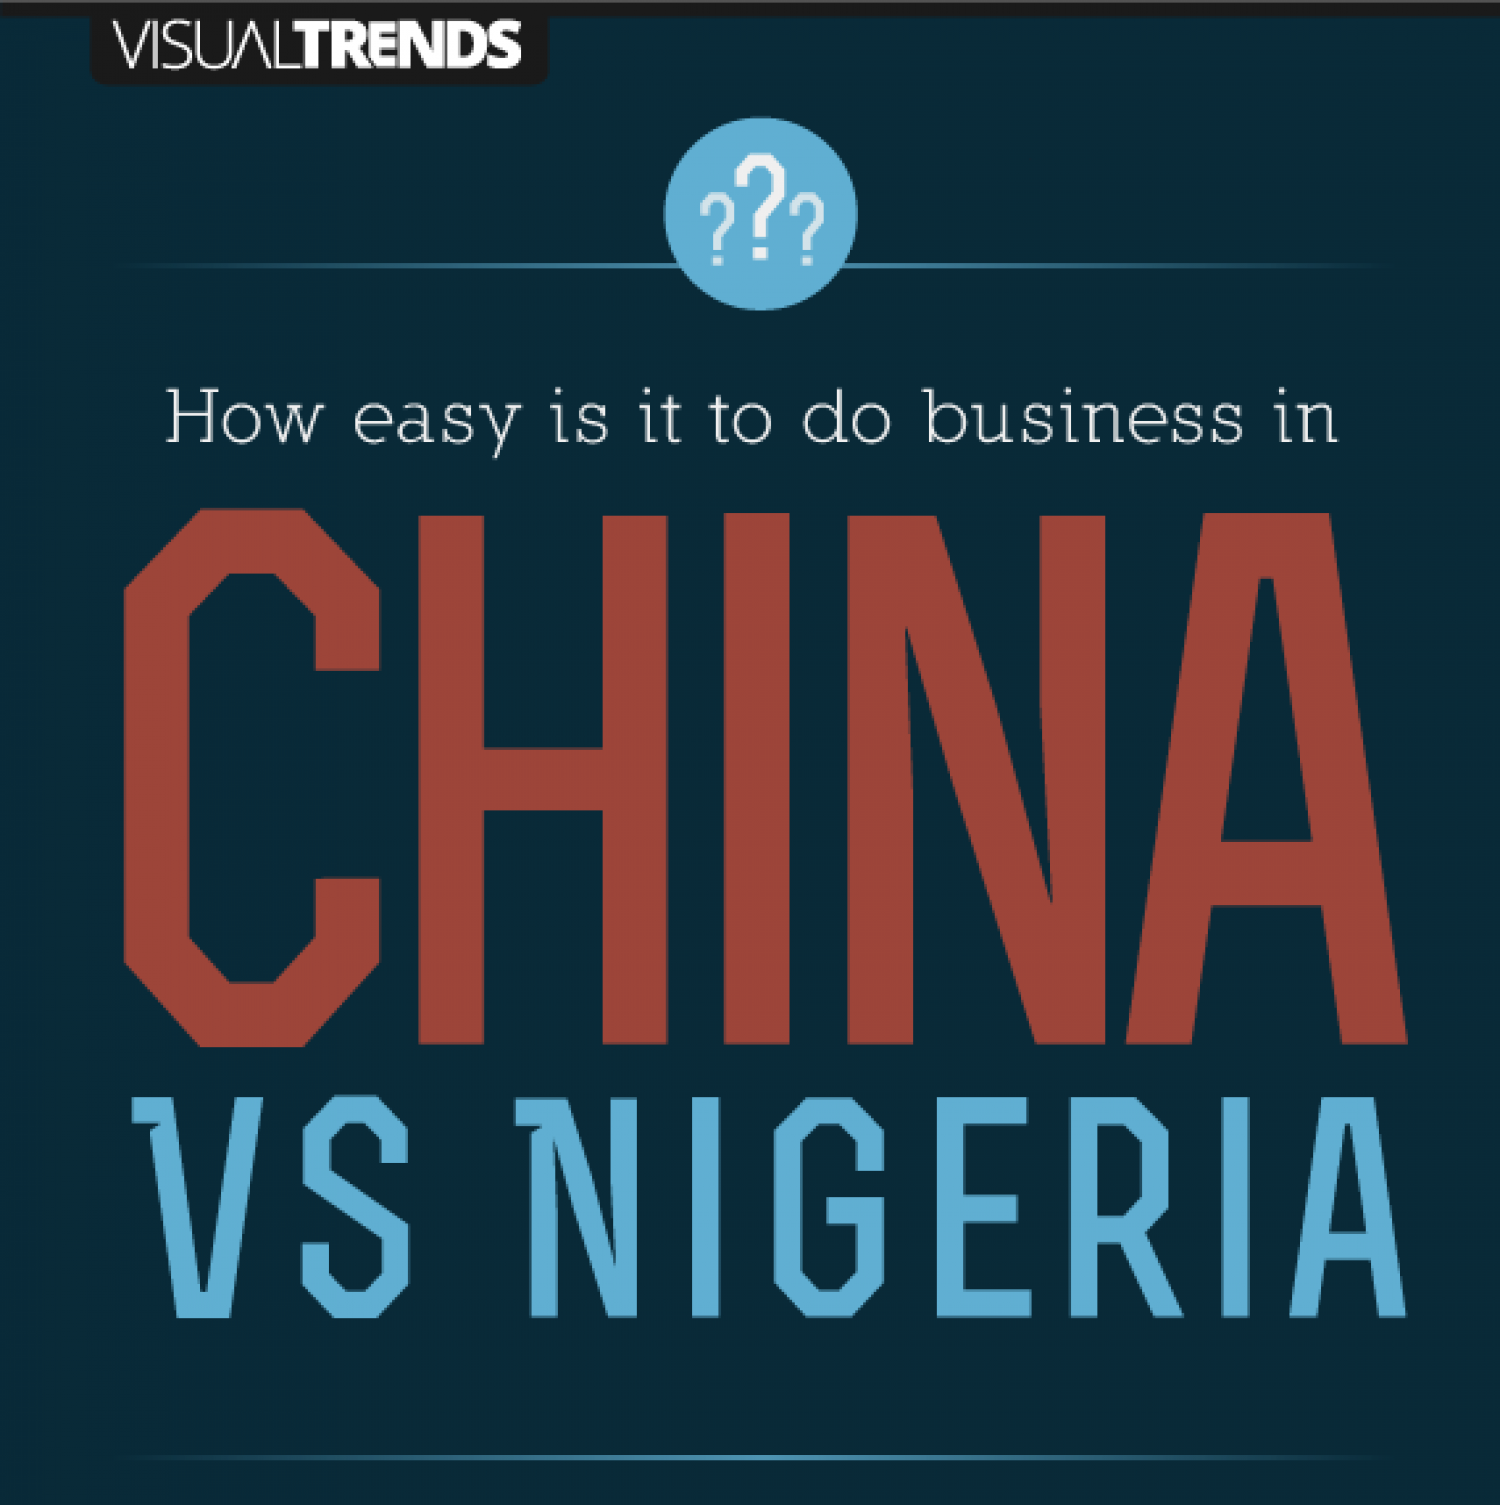 How easy is it to do Business in China vs. Nigeria? Infographic